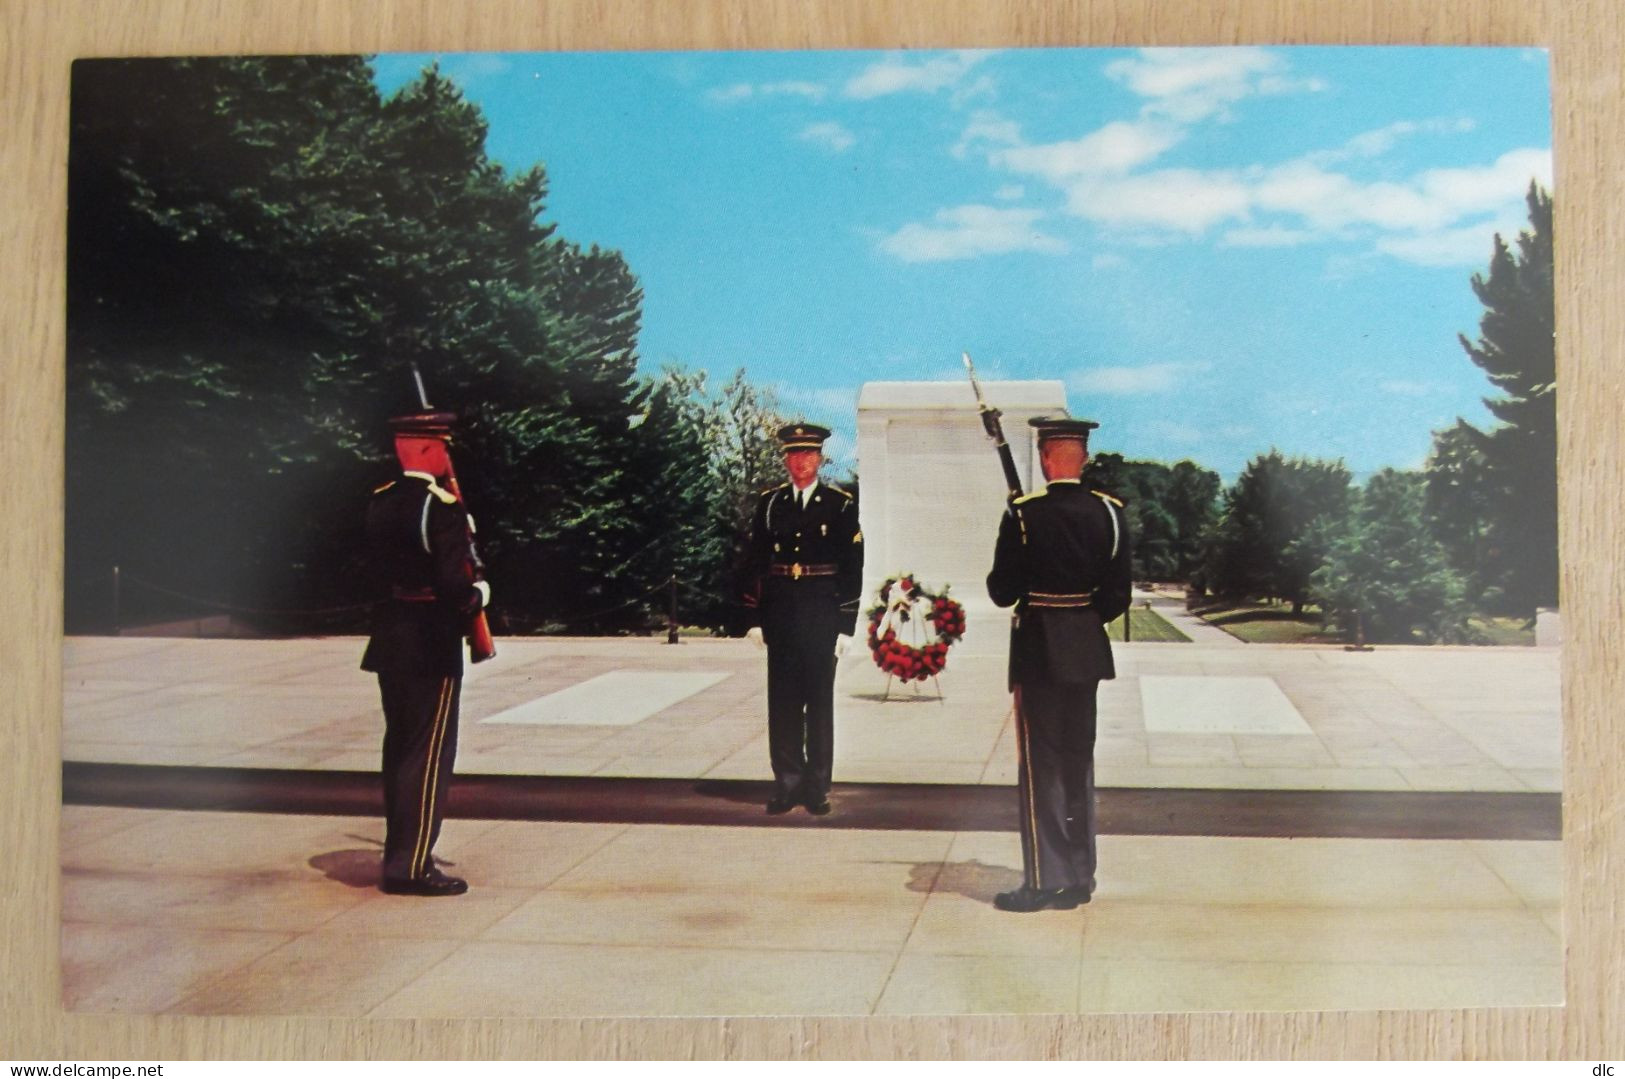 Tomb Of The Unknowns - Prince Lithograph Co. - Arlington